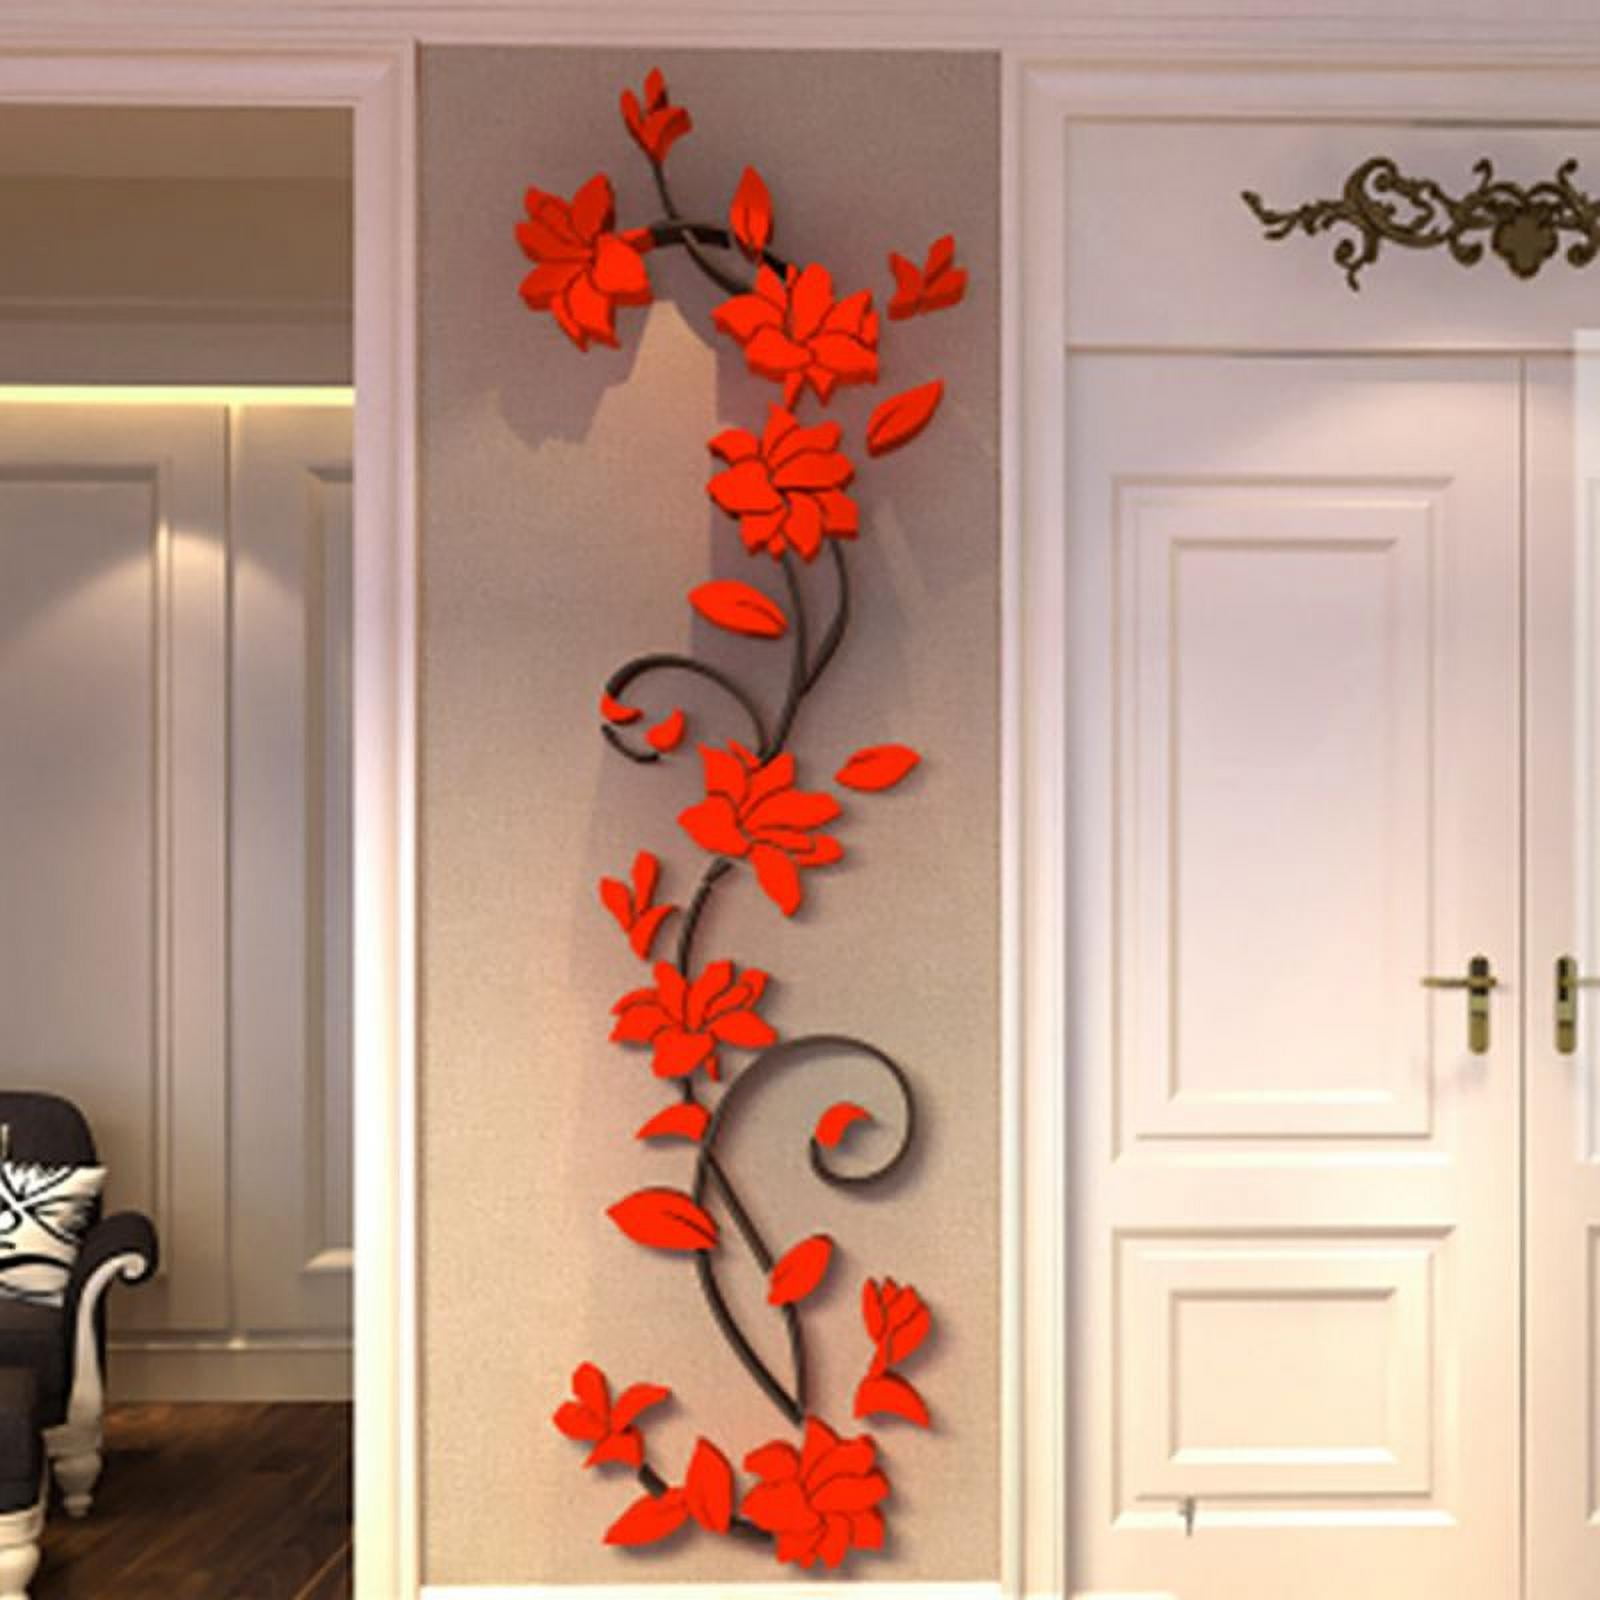 5 Mirror Flower Wall Sticker DIY 3D Acrylic Mural Decal Bed Room Decor Removable 